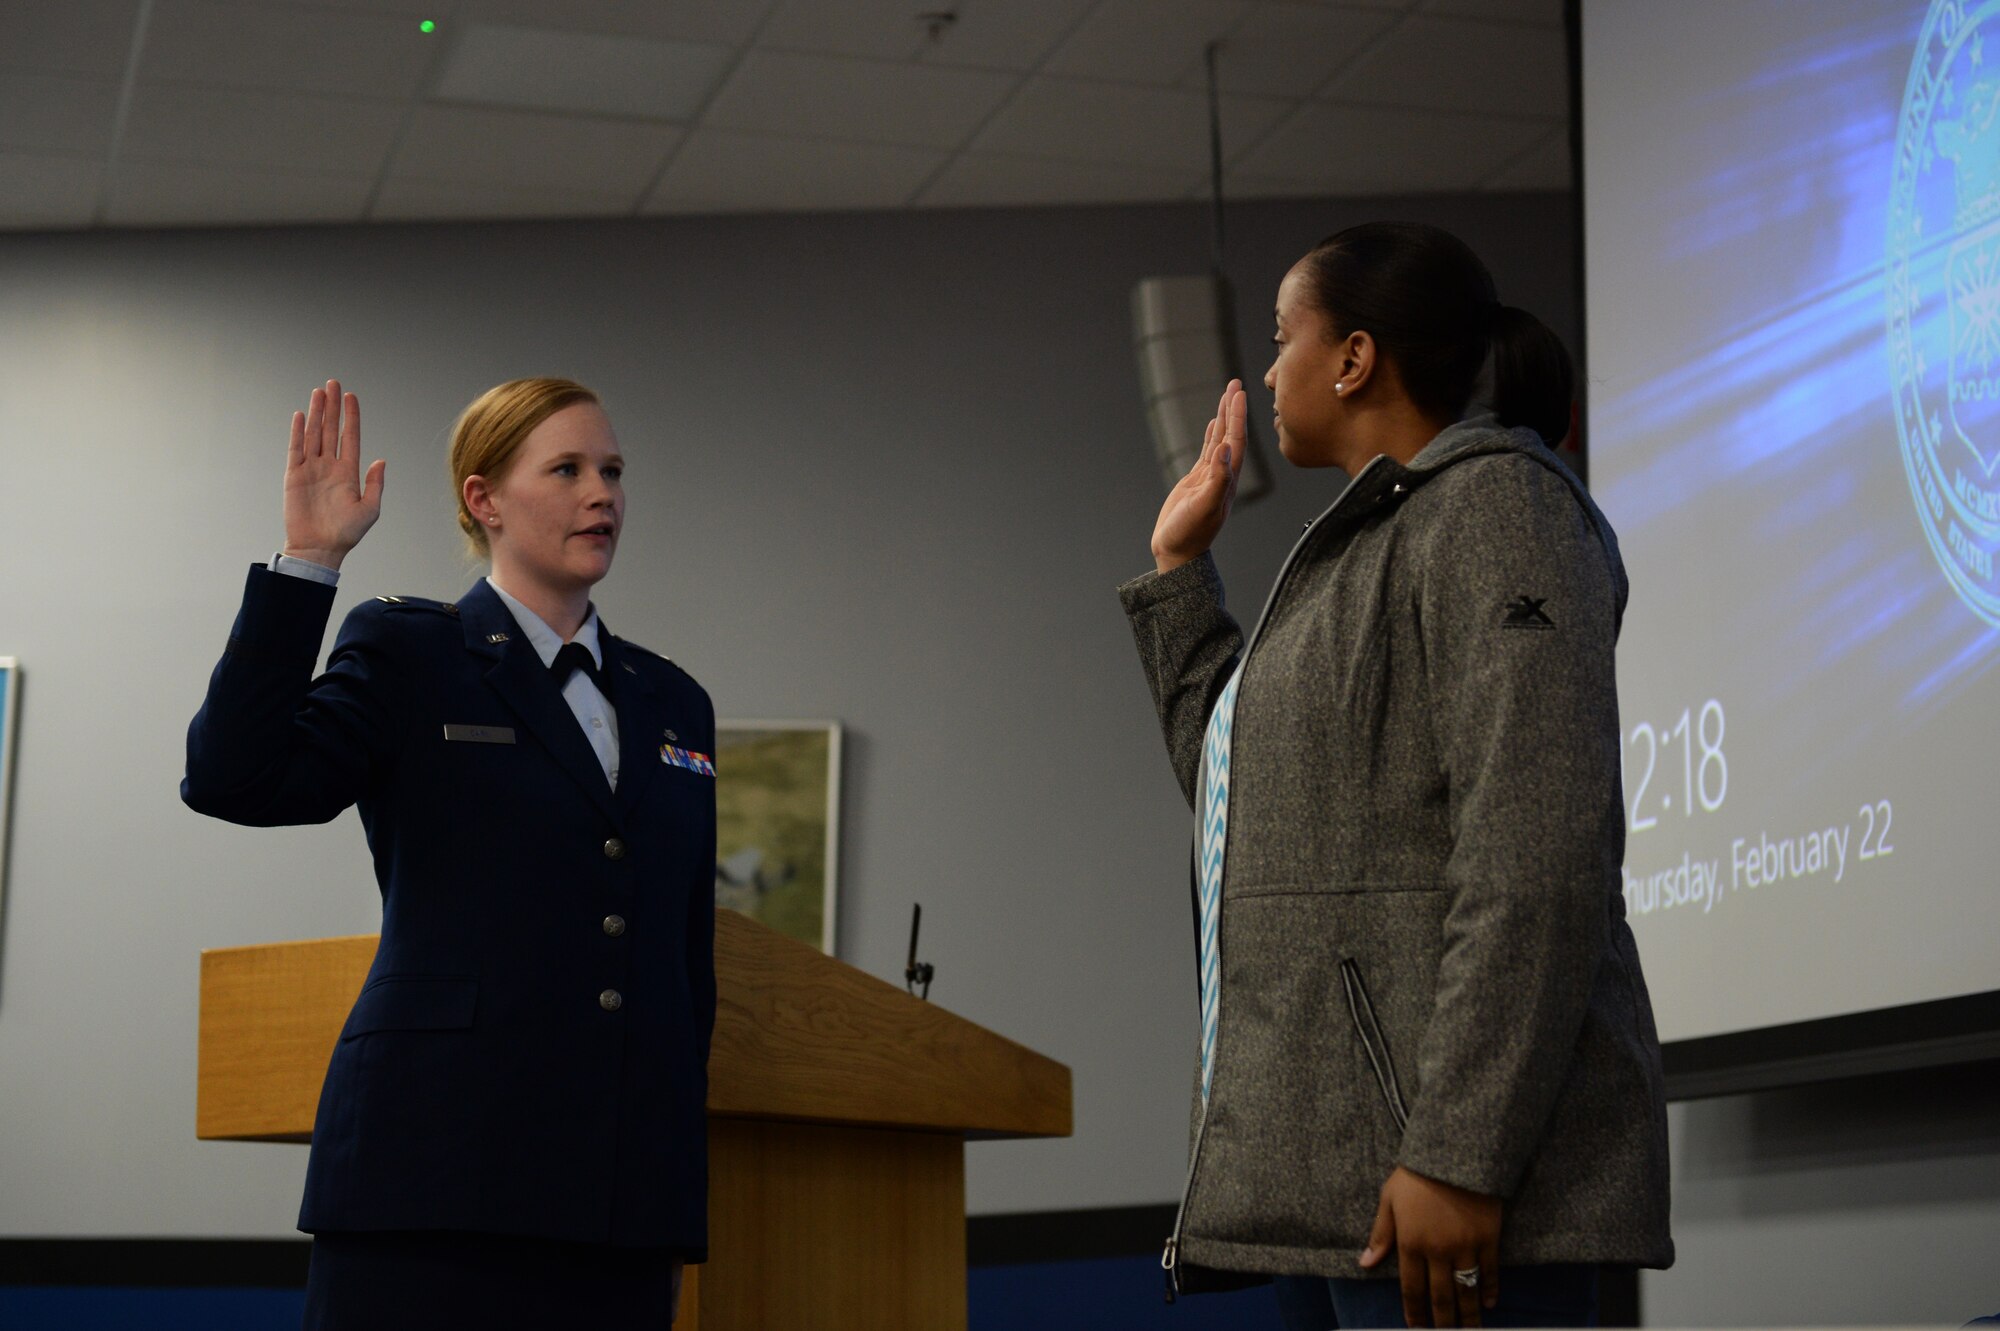 (courtesy photo) Capt. Kristin A. Carl, the special victims’ counsel for the 501st Combat Support Wing, assigned to the Air Force Legal Operations Agency, administers an oath to a witness during a mock trial at the Strike Eagle Complex at Royal Air Force Lakenheath, England, Feb. 22, 2018. The witness played the role of the wife of the accused and provided a perspective of how family members are affected by court proceedings. (U.S. Air Force photo/Airman 1st Class Shanice Williams-Jones)